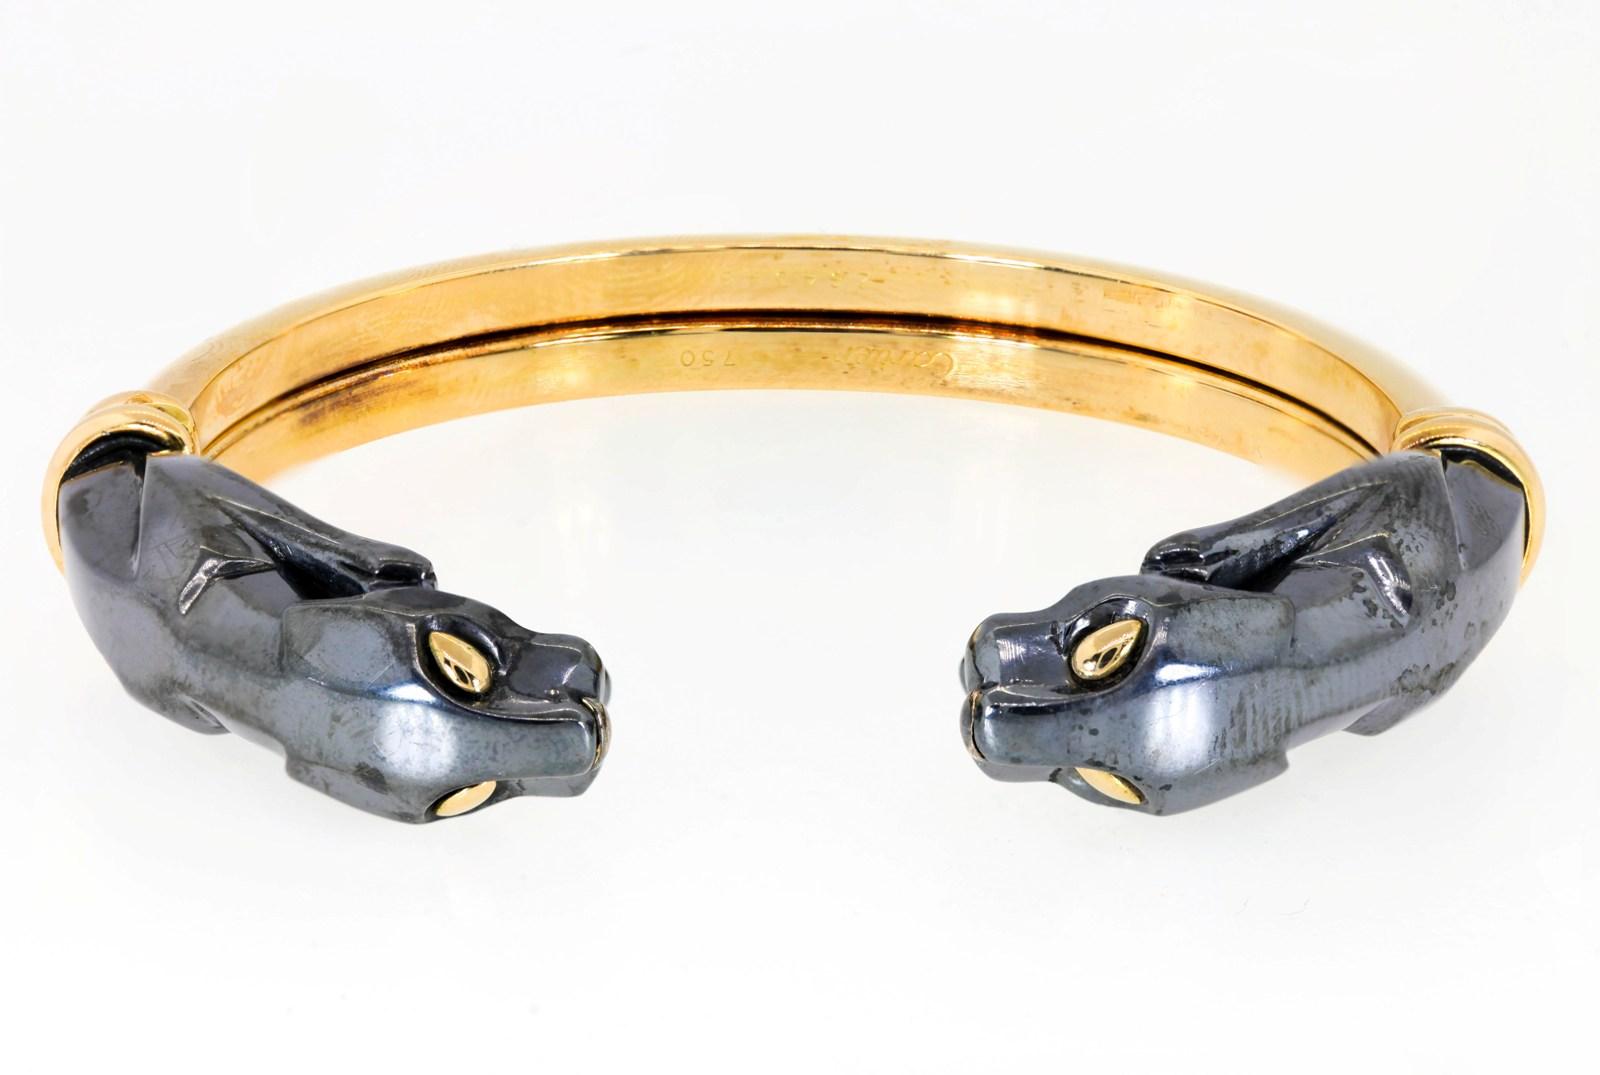 Cartier exquisitely crafted this scarce bangle in 18KT yellow gold and Hematite.  It features the iconic Cartier pouncing Panthers replete with golden eyes.  The gold section of the bangle flexes allowing easy wear and removal on a medium size